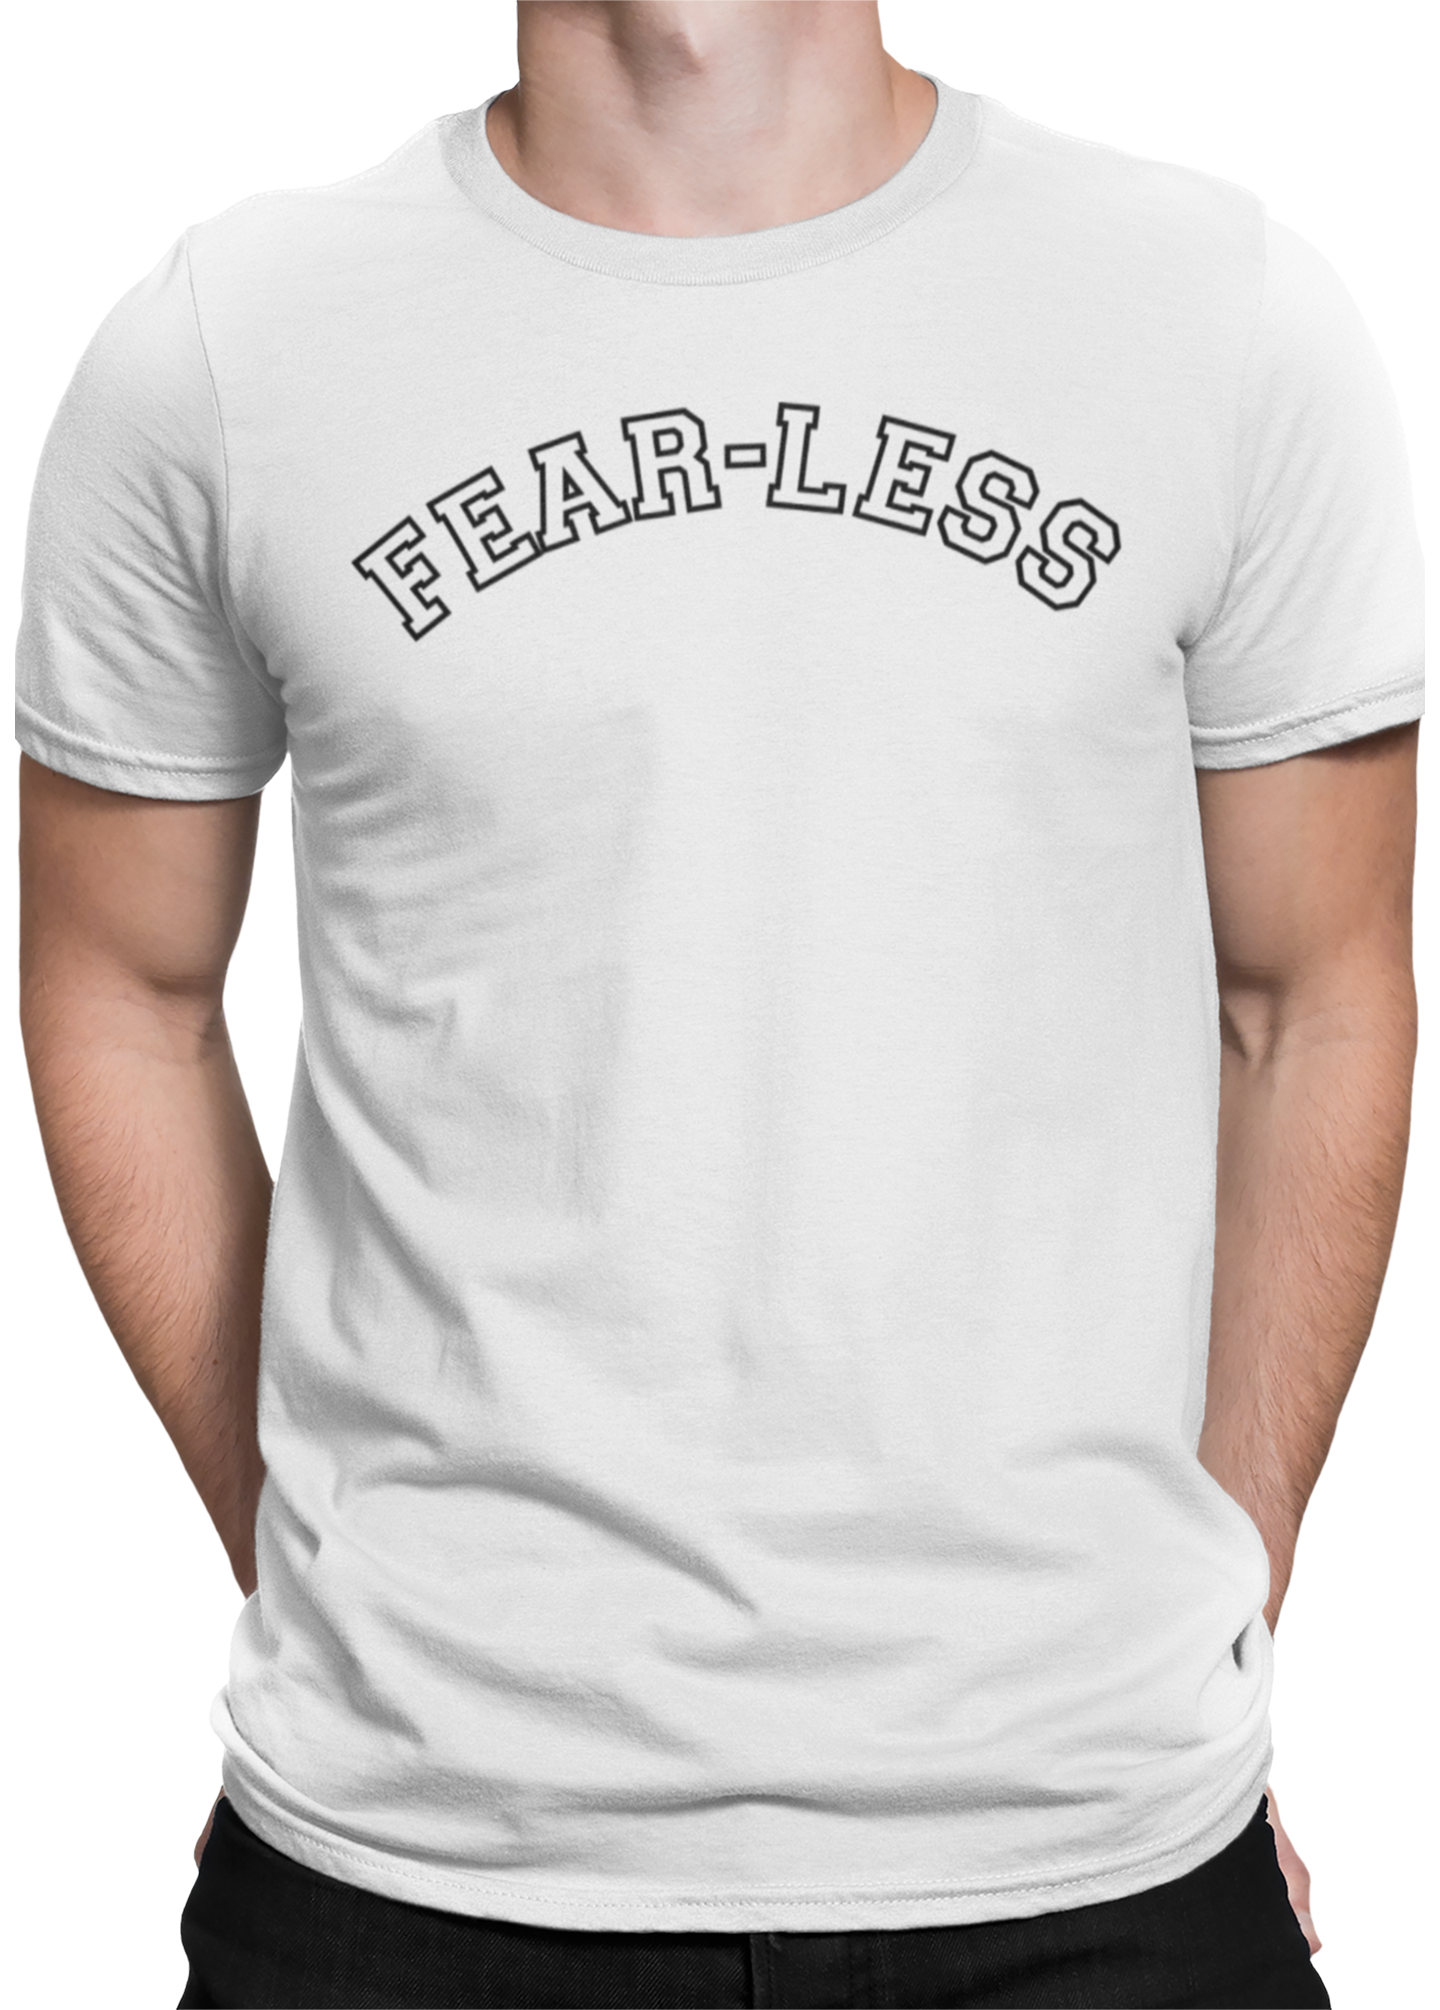 The Fear Less cotton tee